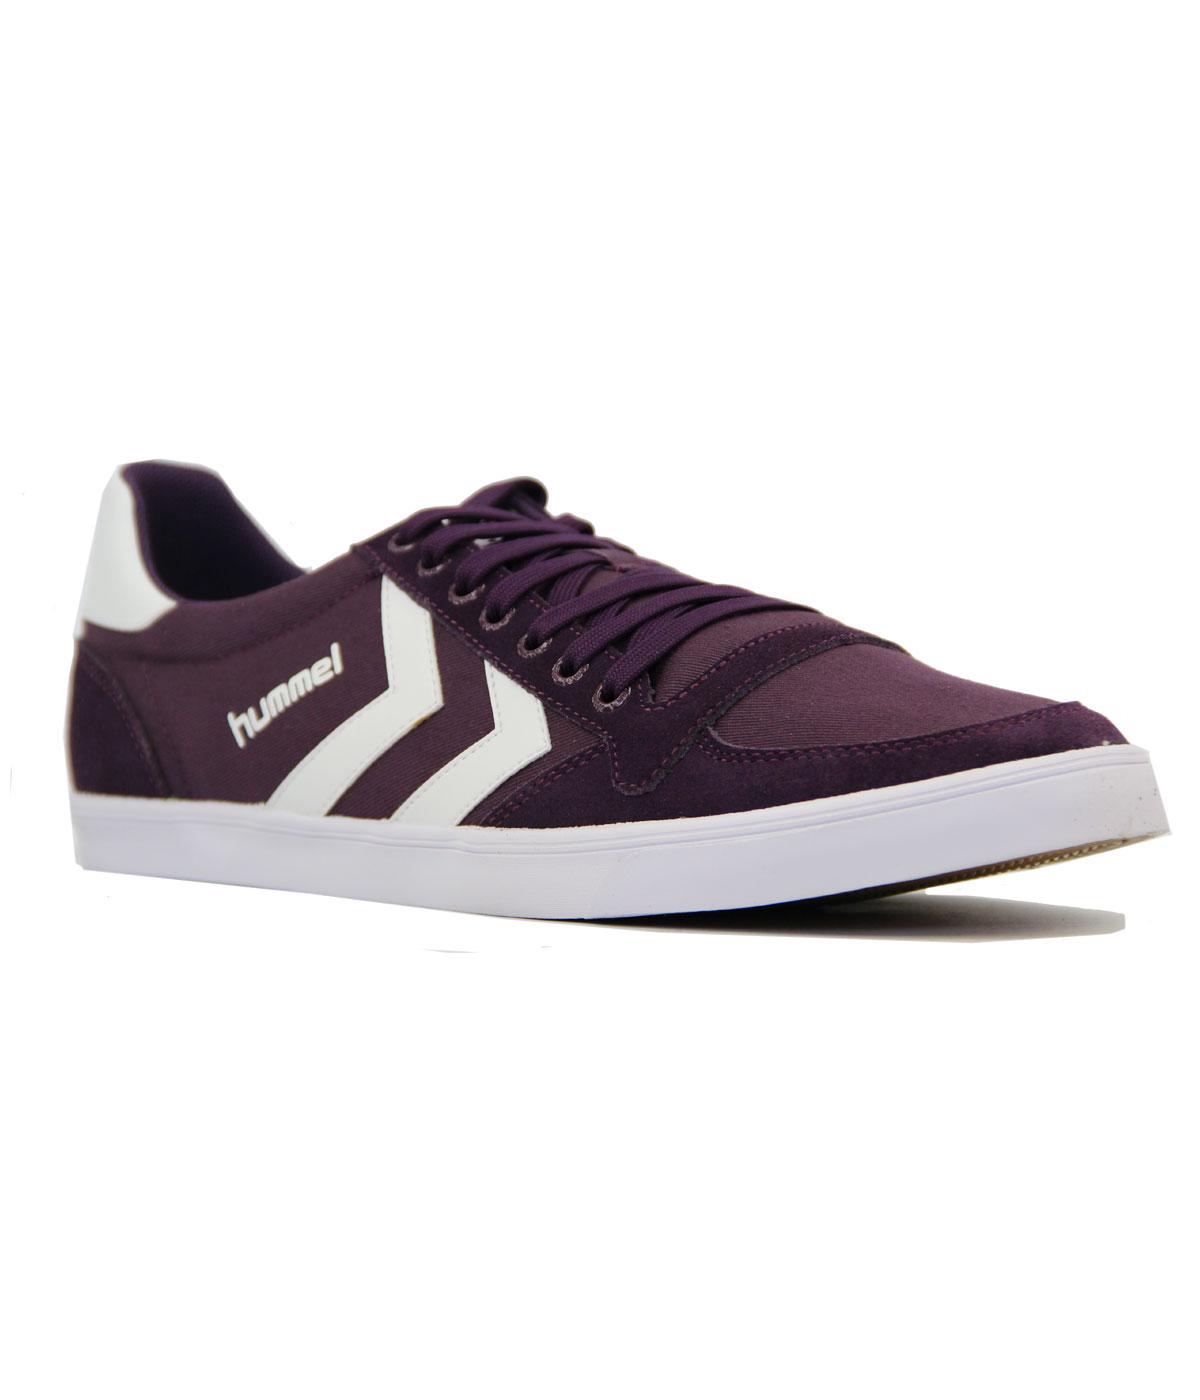 Slimmer Stadil Lo HUMMEL Canvas Retro Trainers P